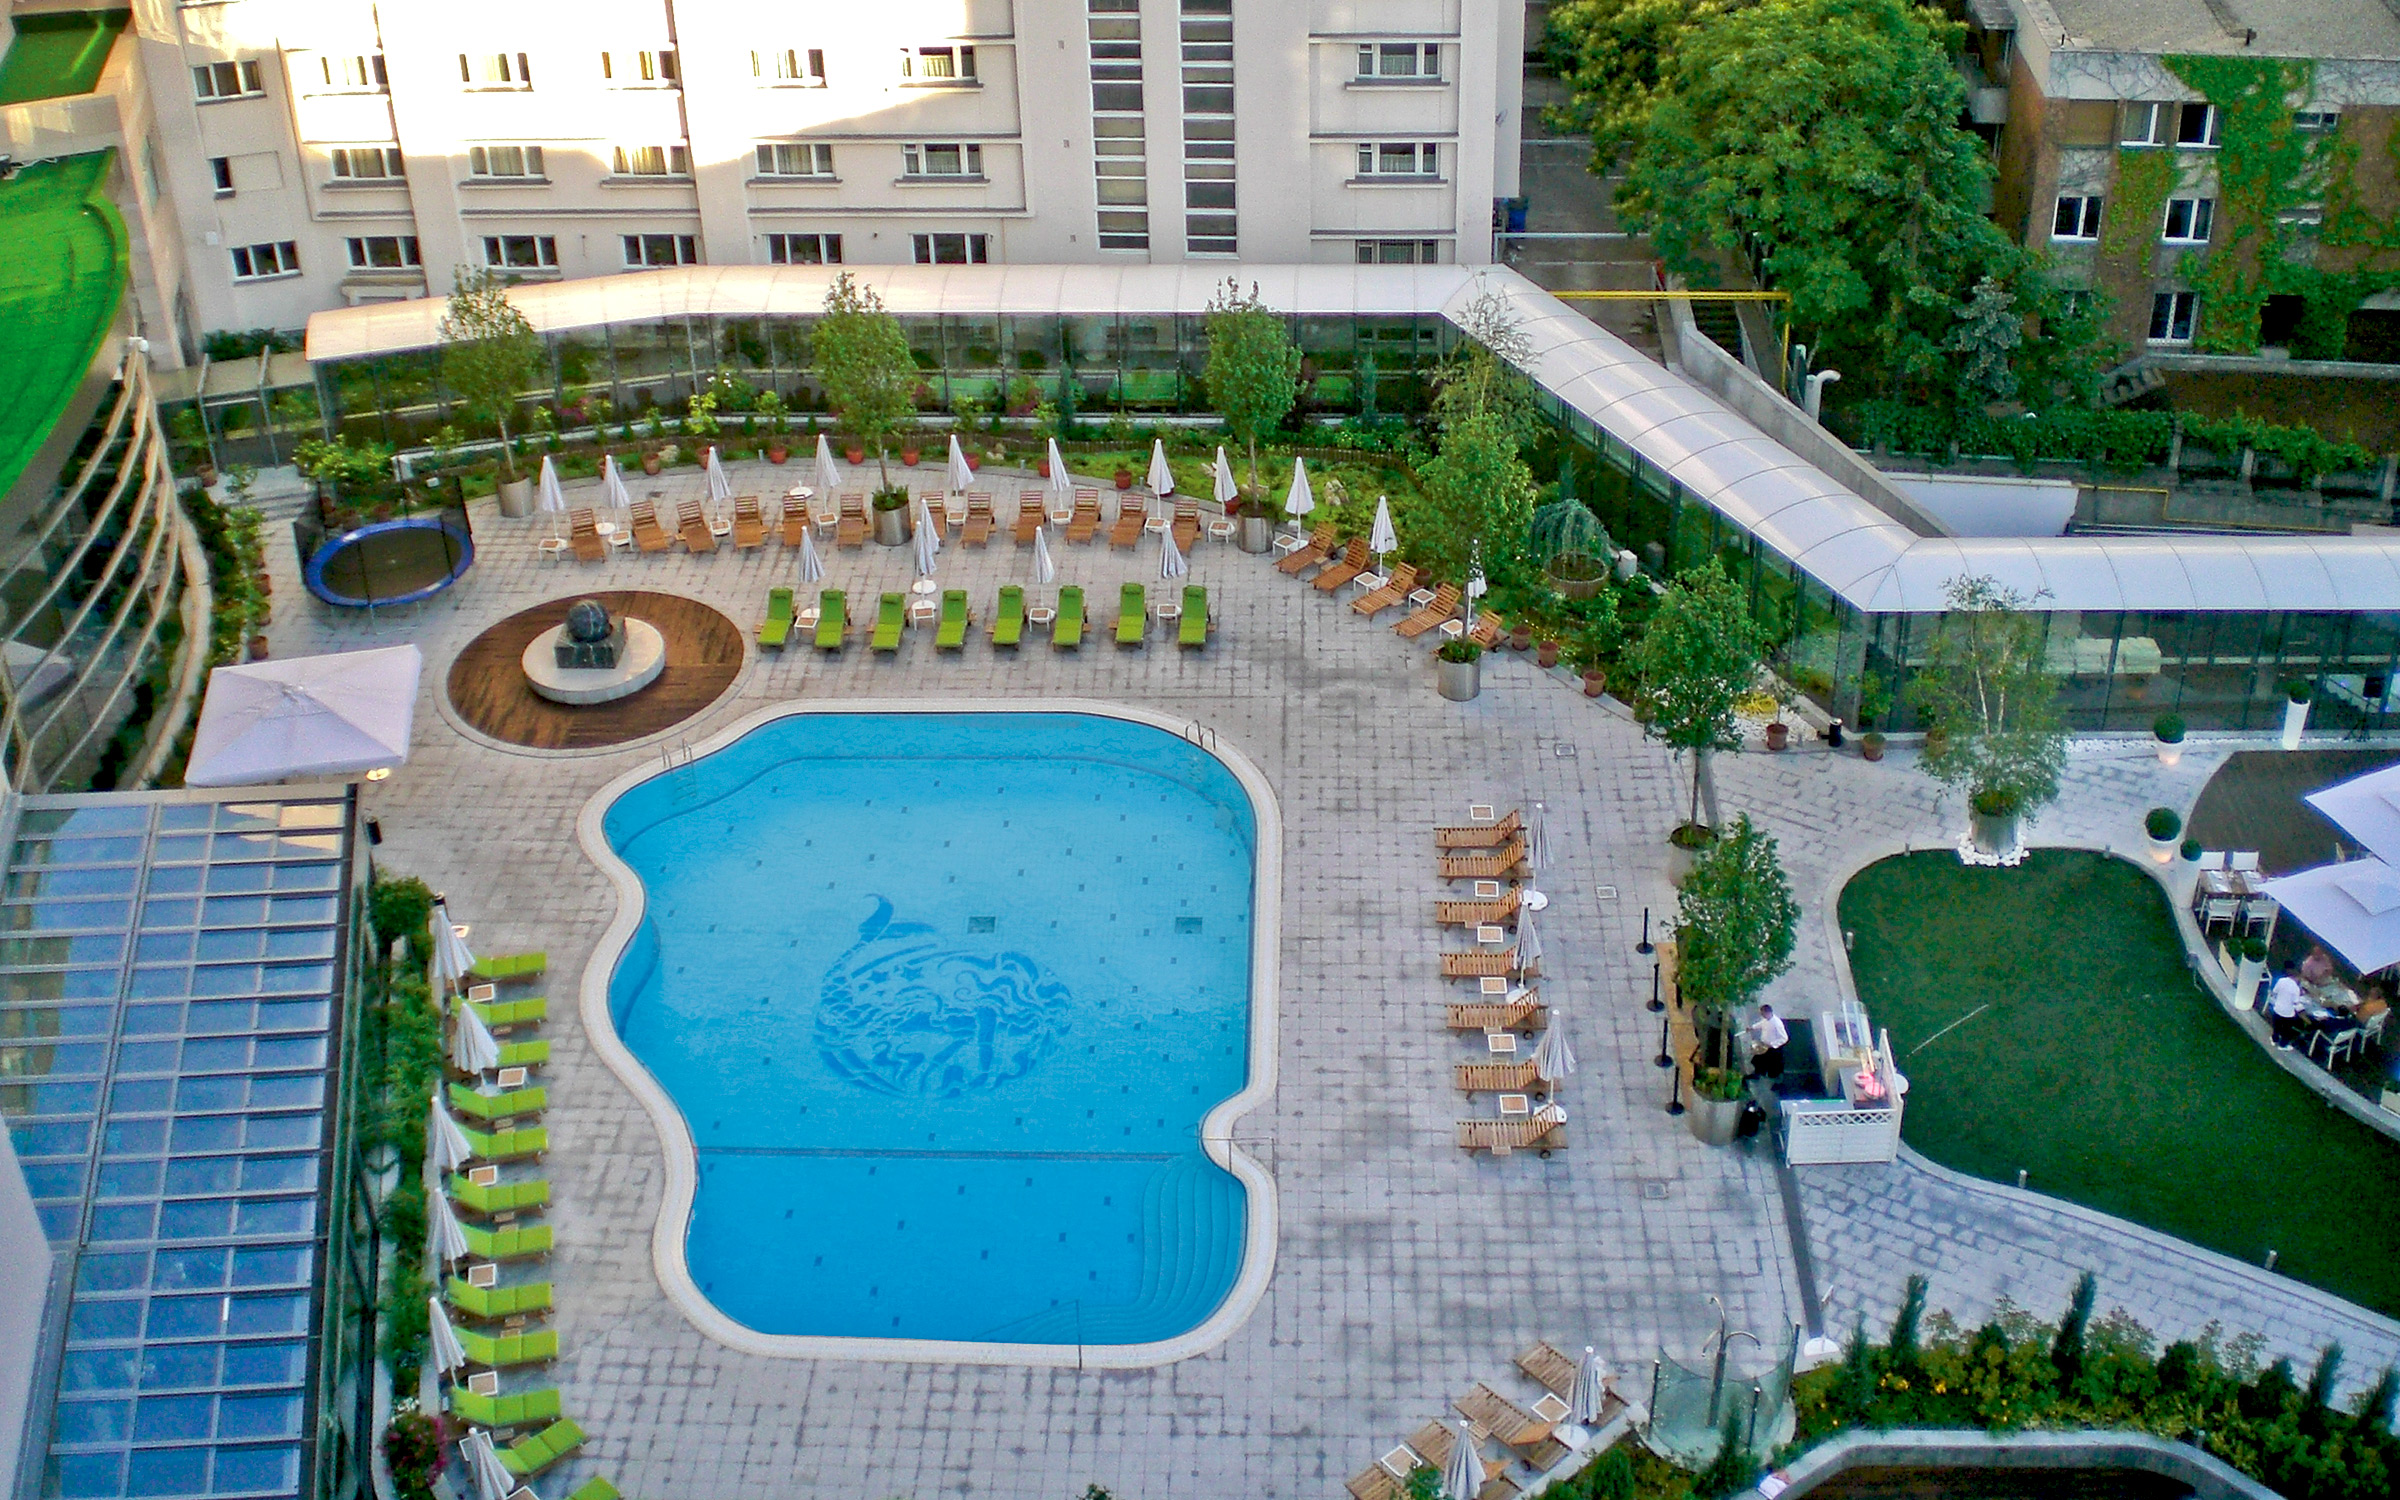 Bird's eye view onto a courtyard with sun beds and a swimming pool